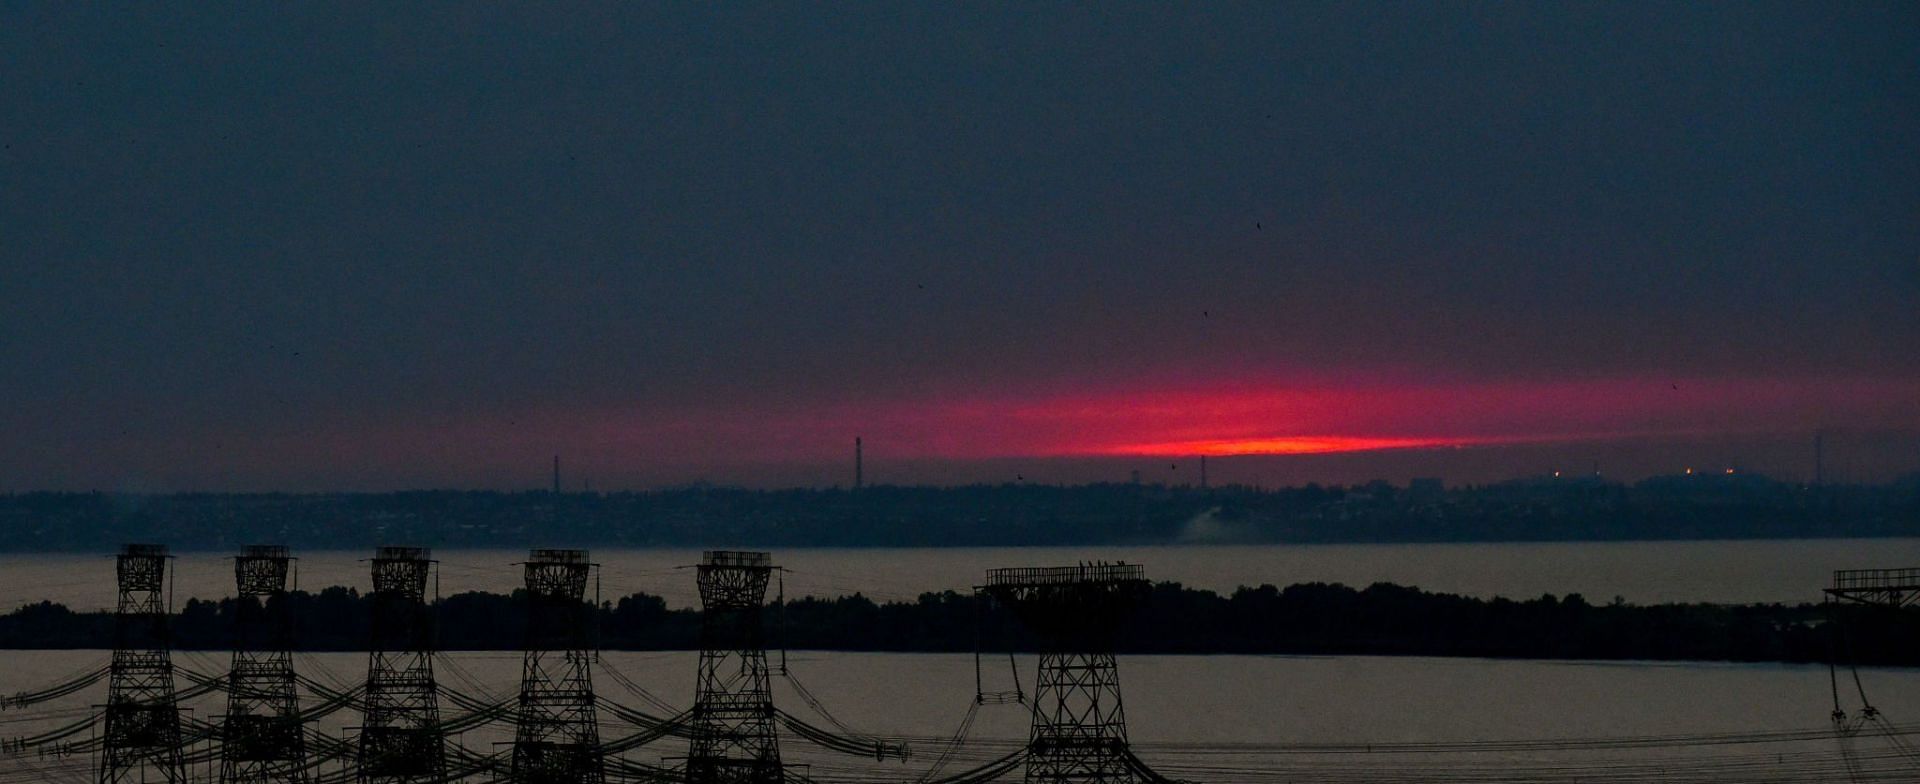 Zaporizhzhia Nuclear Power Plant fire sparked concern online (Image via Getty Images/Dmytro Smolyenko)